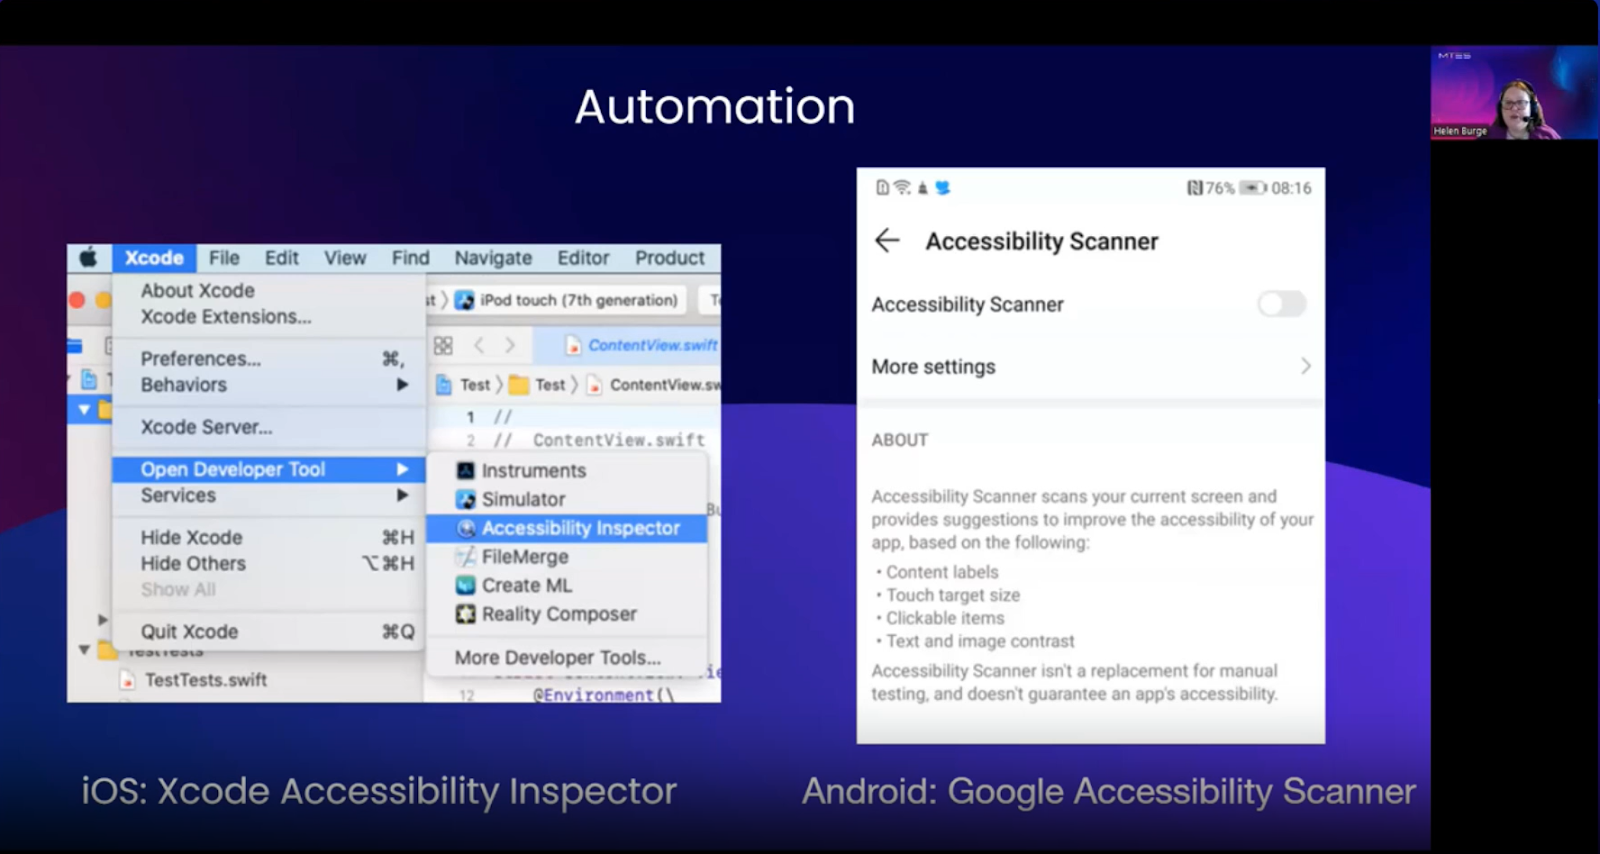 Screen shot of automation tools